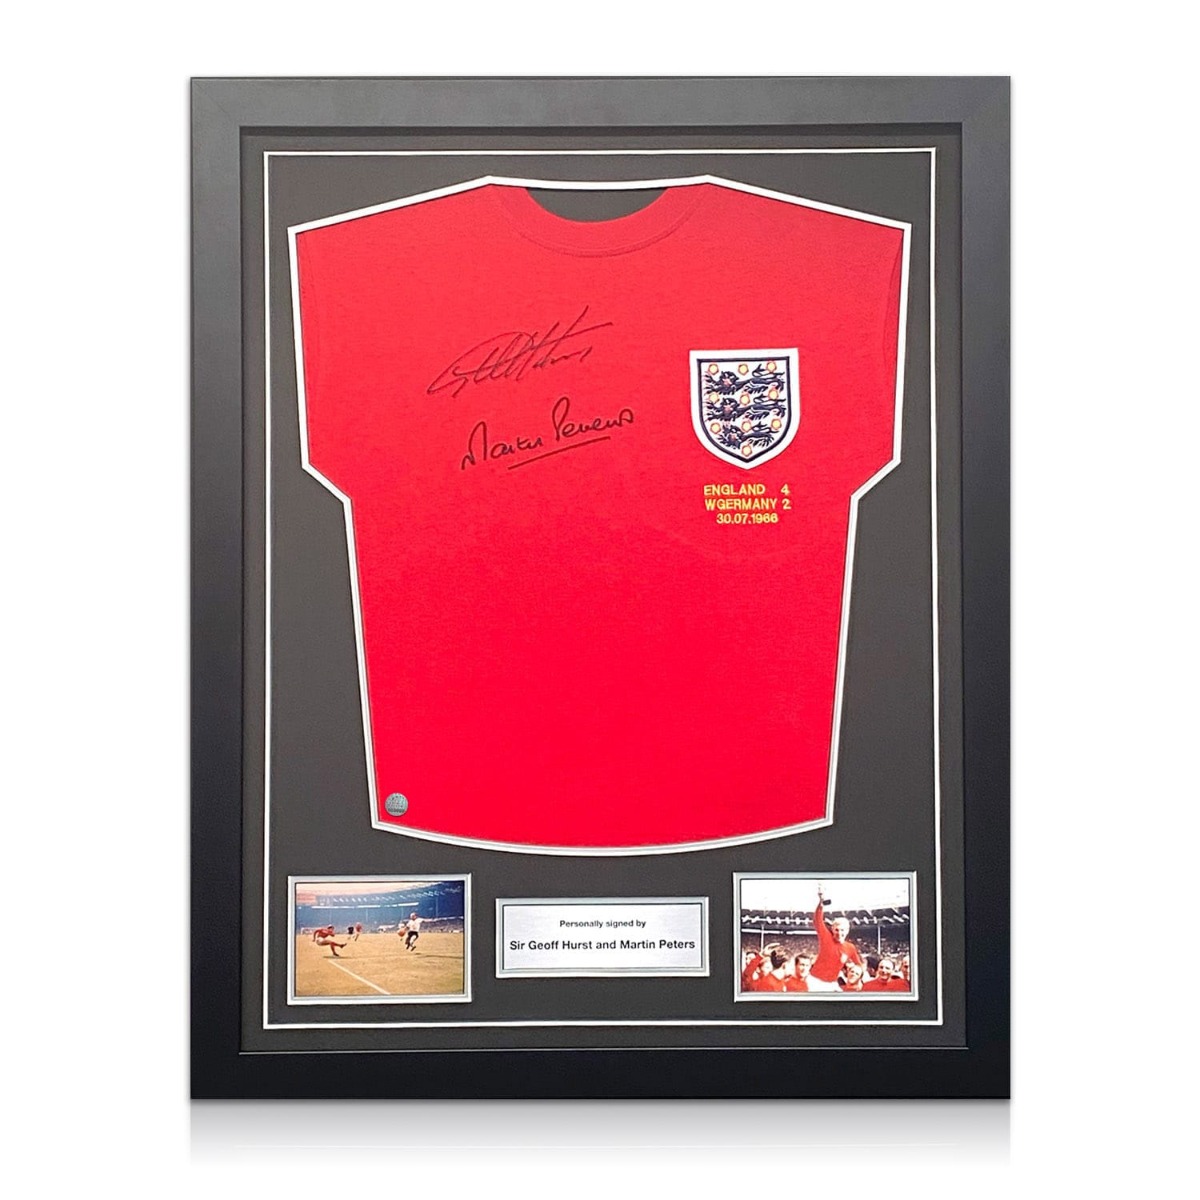 Authentic Autographs Great Gift Panoramic Genuine Hand Signed With Certificate A1SportingMemorabilia.co.uk Framed Sir Geoff Hurst Signed England 1966 Shirt Special Edition